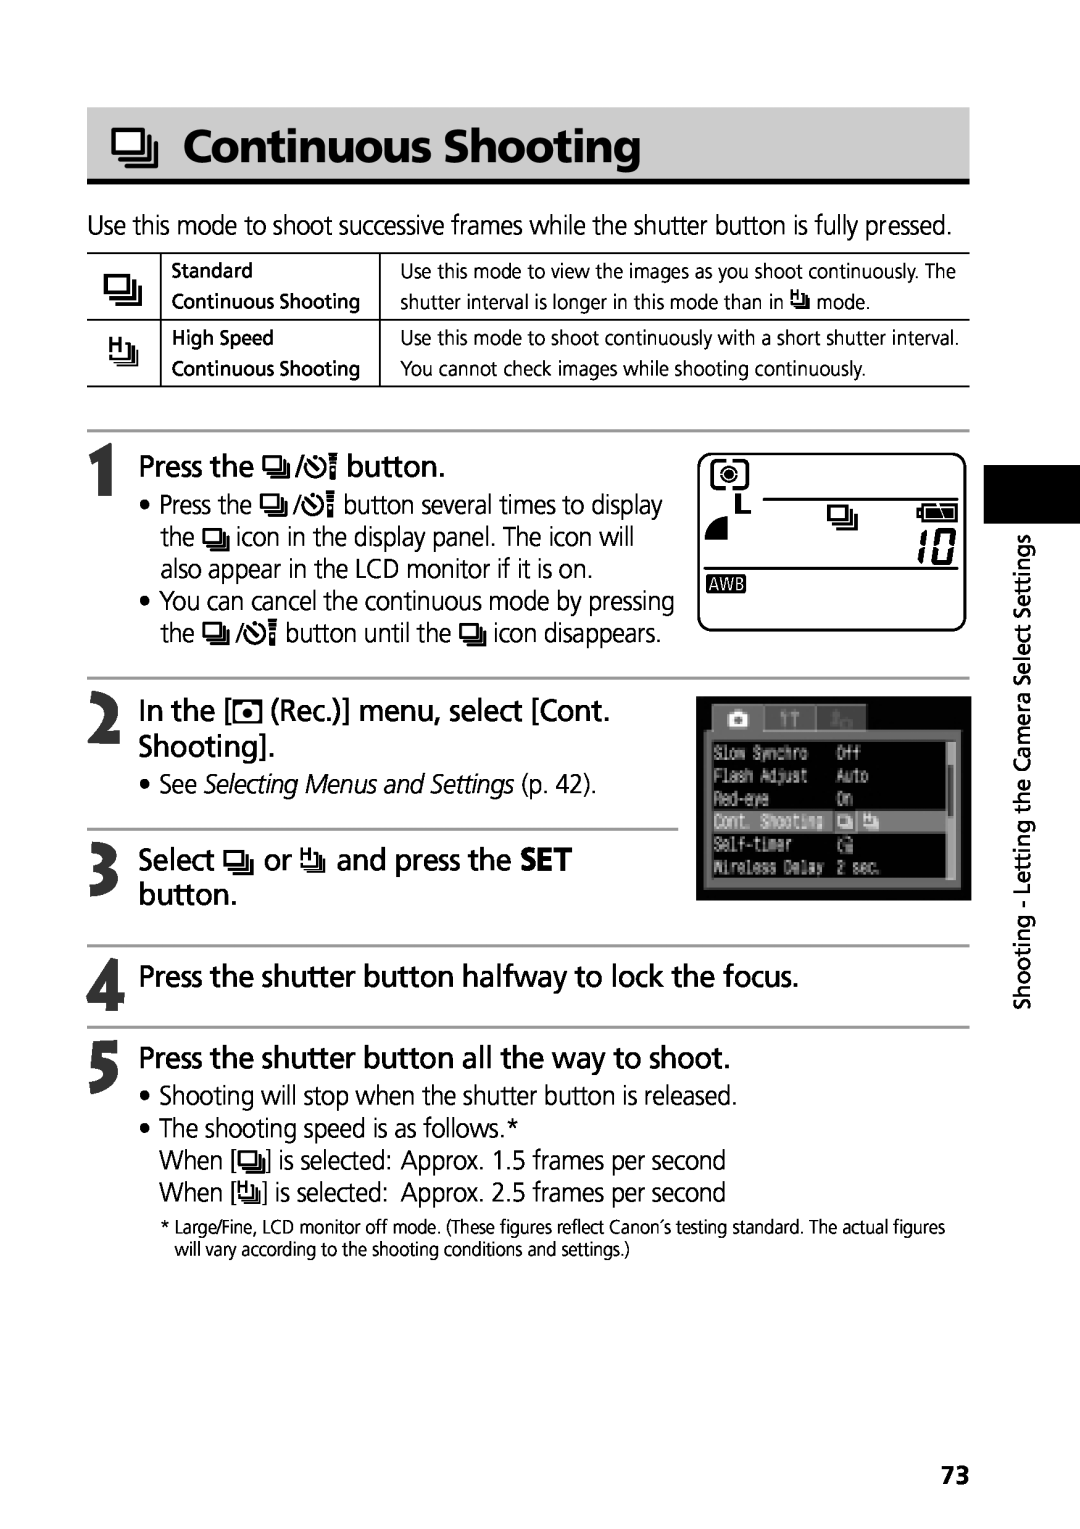 Canon G3 Continuous Shooting, In the Rec. menu, select Cont. Shooting, Selectbutton. or and press the, Press the, When 